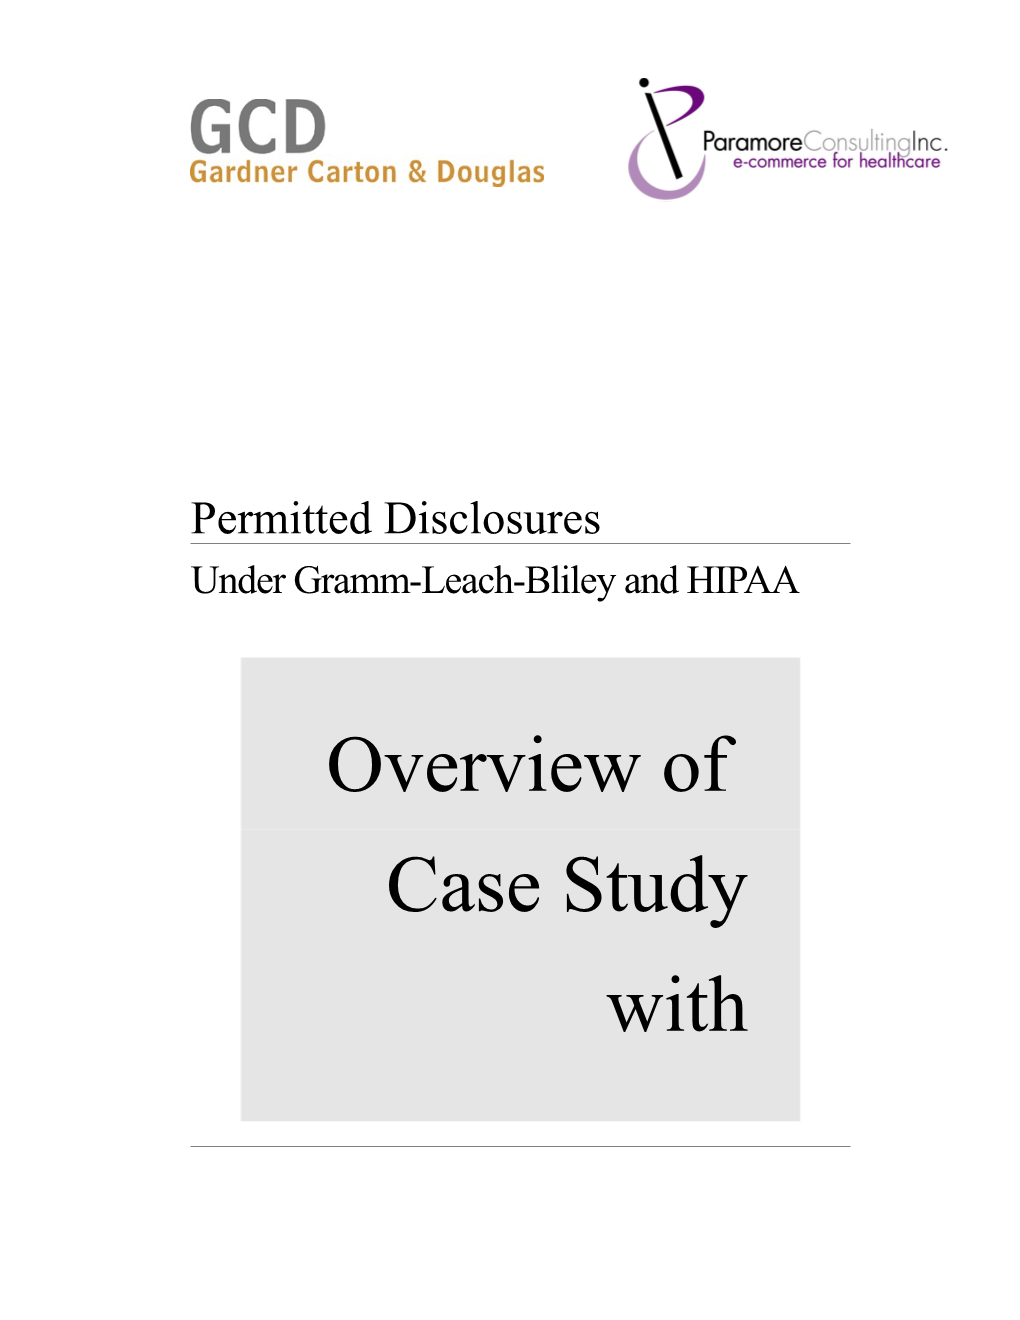 Permitted Disclosures Under GLB & HIPAA